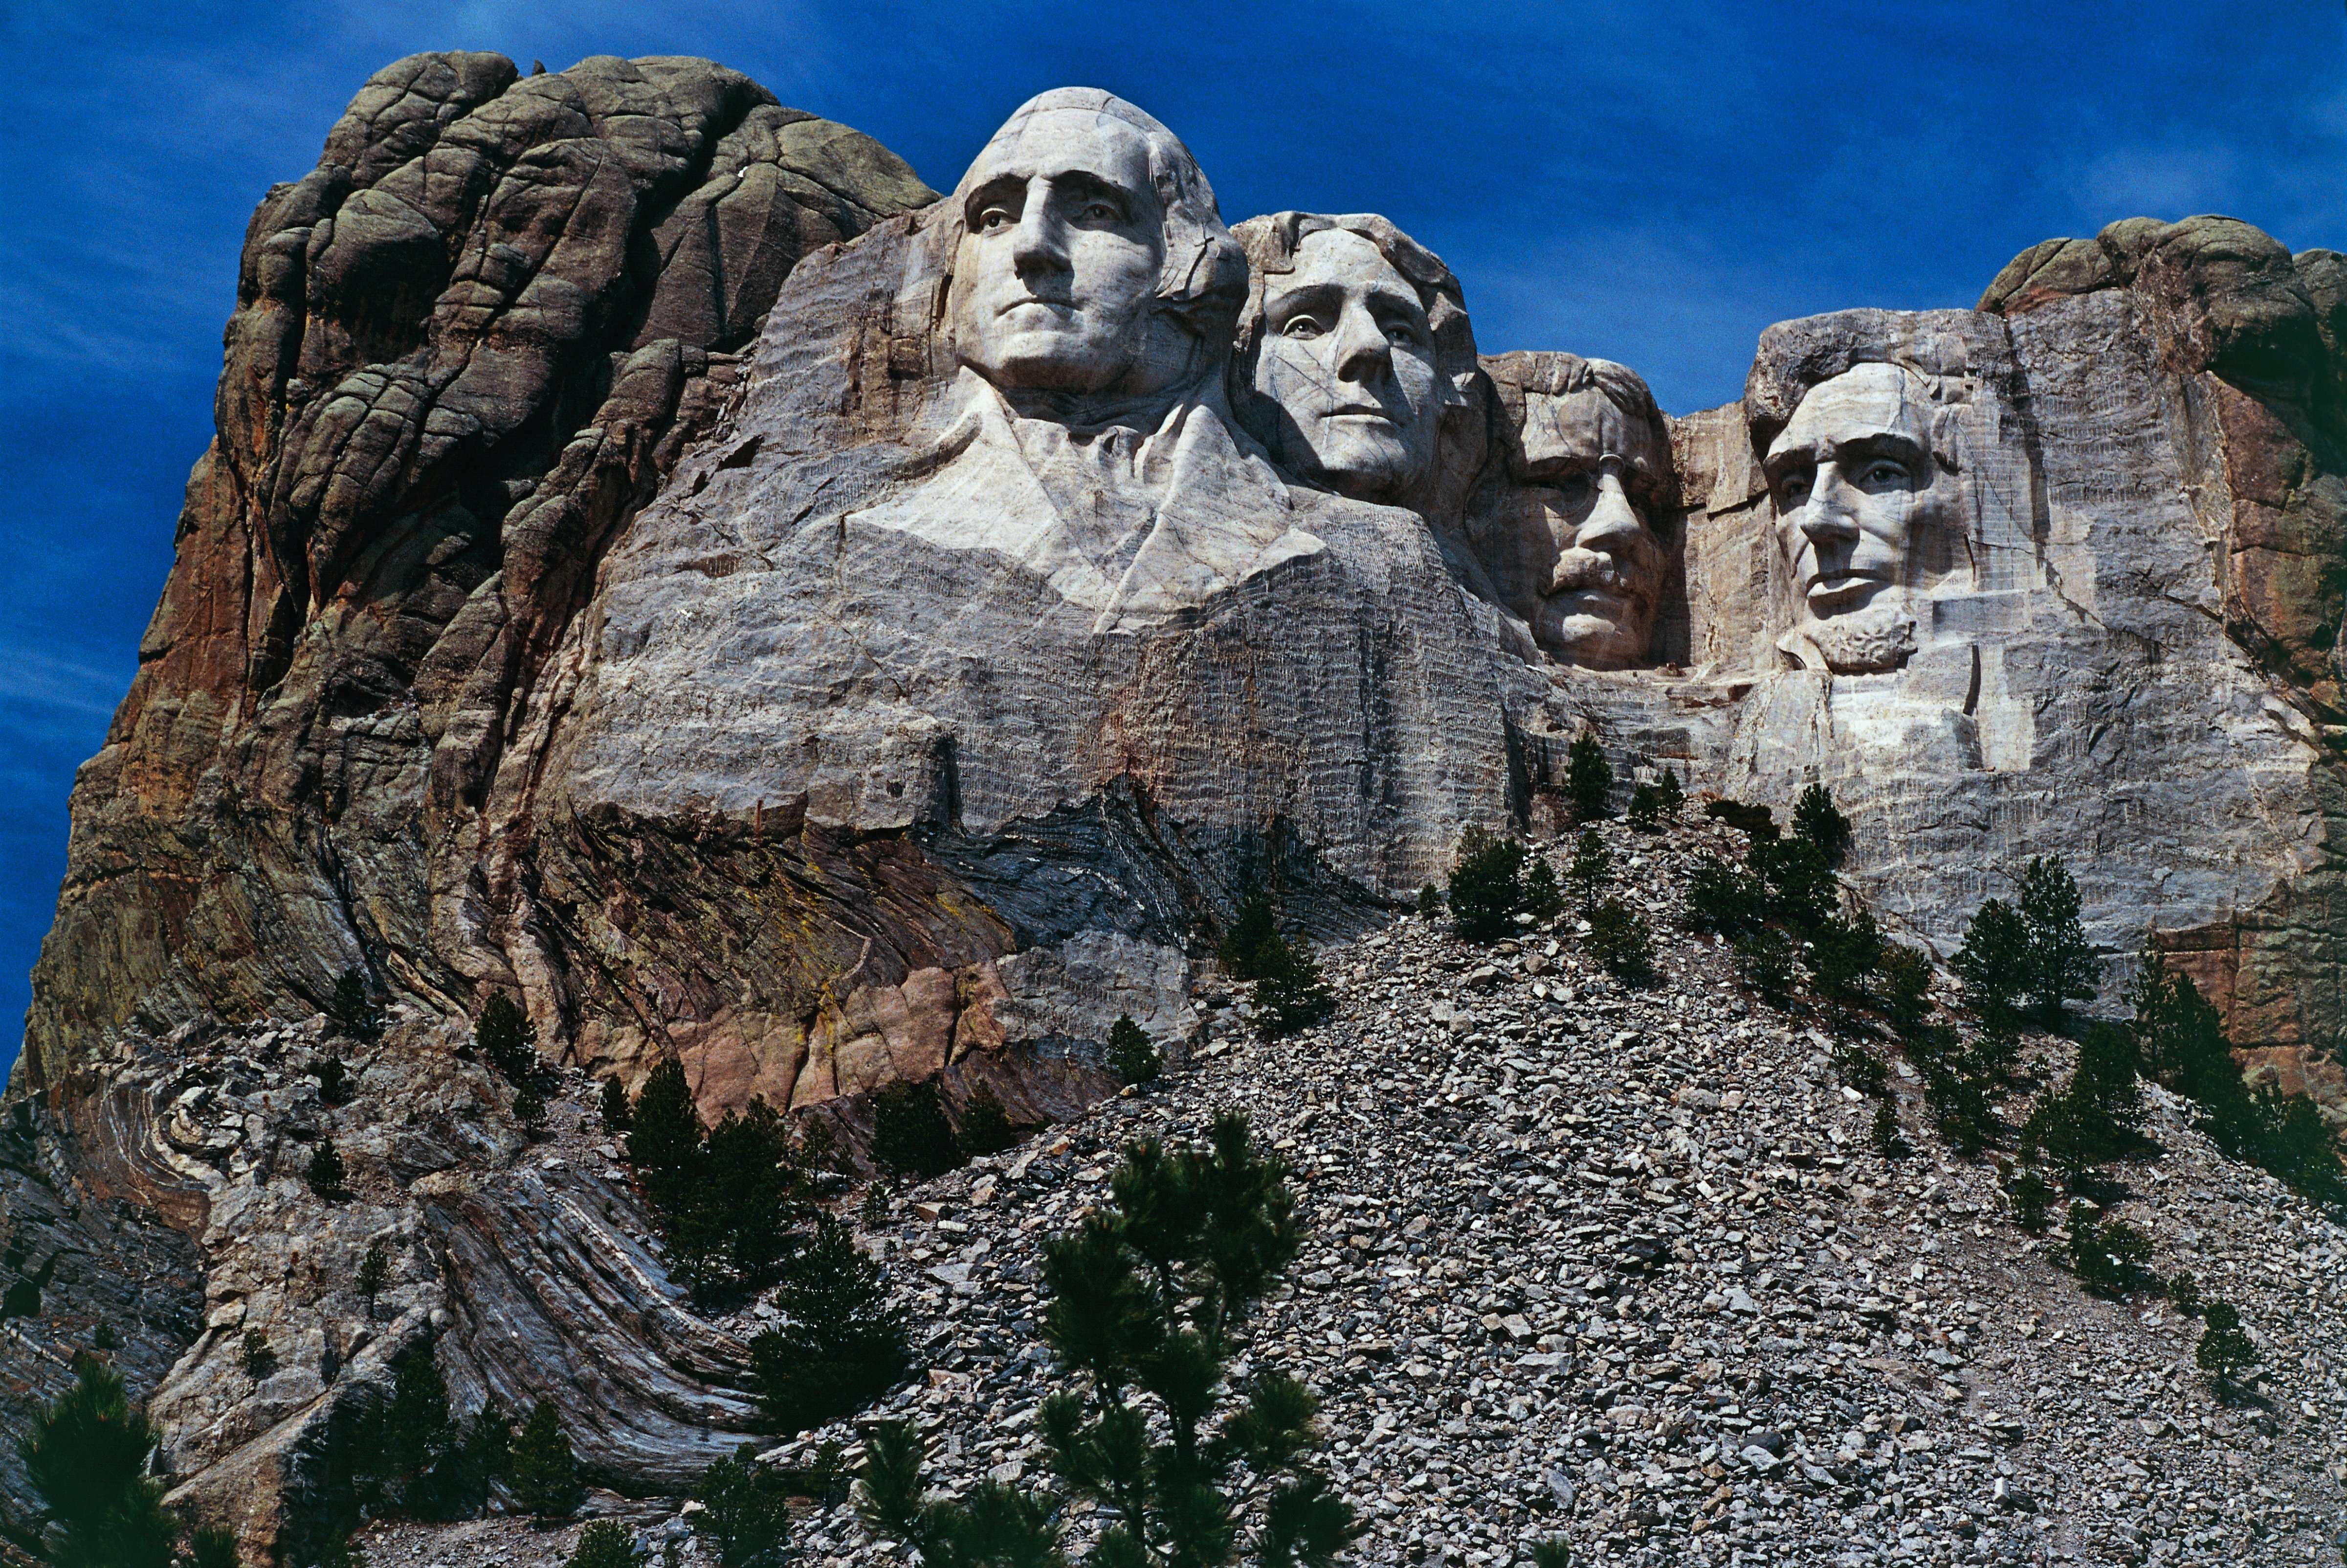 The carved sculptures depicting the faces of US Presidents George Washington (1732-1799) and Thomas Jefferson (1743-1826), National monument, Mount Rushmore, South Dakota, United States of America. (De Agostini/Getty Images)